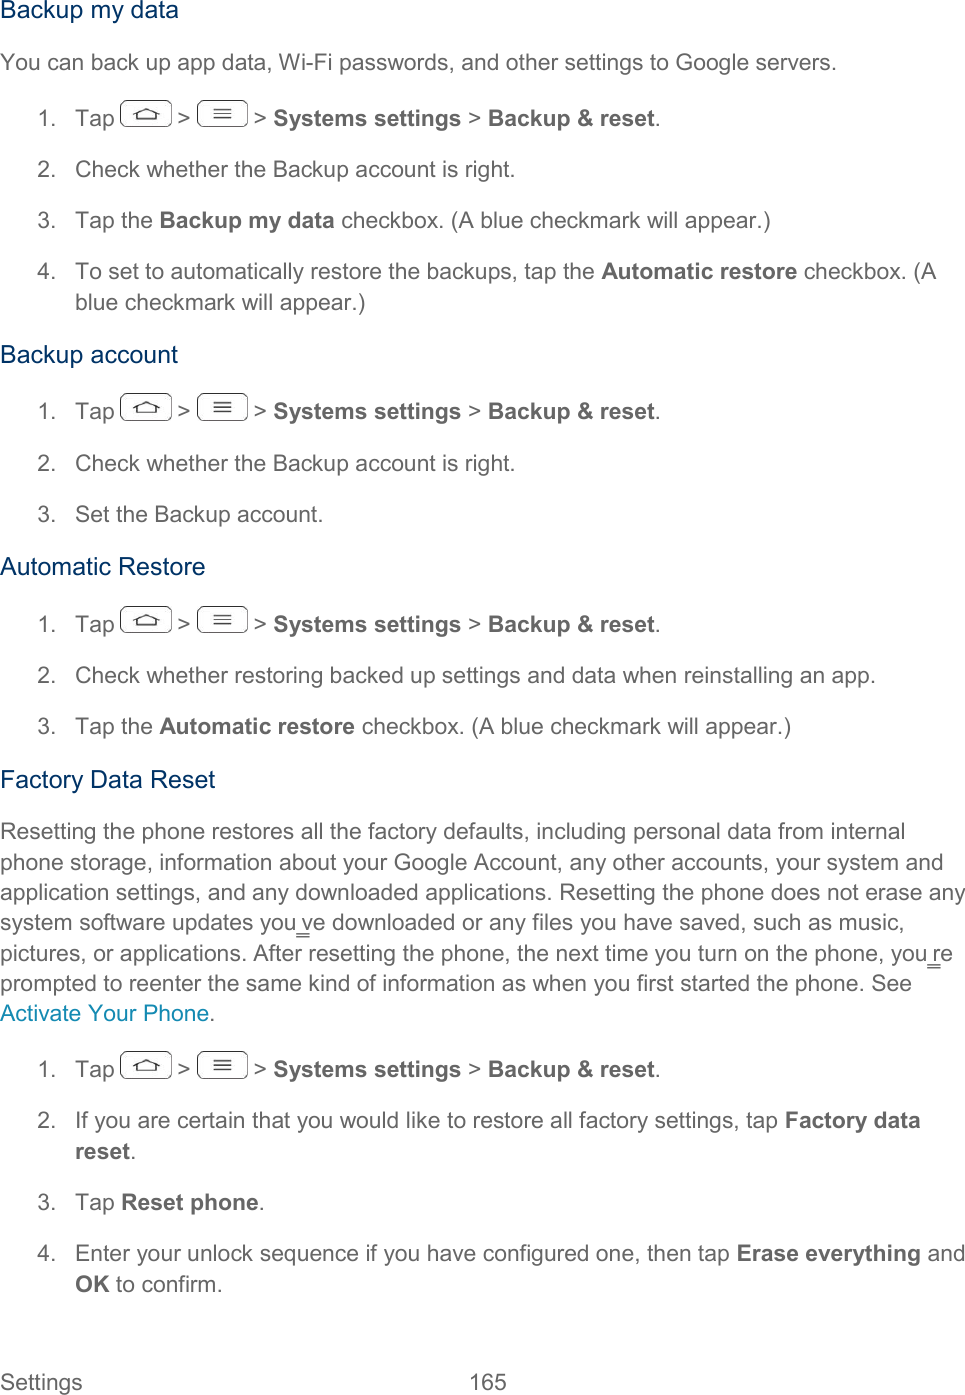  Settings  165   Backup my data You can back up app data, Wi-Fi passwords, and other settings to Google servers. 1.  Tap   &gt;   &gt; Systems settings &gt; Backup &amp; reset. 2.  Check whether the Backup account is right.  3.  Tap the Backup my data checkbox. (A blue checkmark will appear.) 4.  To set to automatically restore the backups, tap the Automatic restore checkbox. (A blue checkmark will appear.) Backup account 1.  Tap   &gt;   &gt; Systems settings &gt; Backup &amp; reset. 2.  Check whether the Backup account is right.  3.  Set the Backup account. Automatic Restore 1.  Tap   &gt;   &gt; Systems settings &gt; Backup &amp; reset. 2.  Check whether restoring backed up settings and data when reinstalling an app. 3.  Tap the Automatic restore checkbox. (A blue checkmark will appear.) Factory Data Reset Resetting the phone restores all the factory defaults, including personal data from internal phone storage, information about your Google Account, any other accounts, your system and application settings, and any downloaded applications. Resetting the phone does not erase any system software updates you‗ve downloaded or any files you have saved, such as music, pictures, or applications. After resetting the phone, the next time you turn on the phone, you‗re prompted to reenter the same kind of information as when you first started the phone. See Activate Your Phone. 1.  Tap   &gt;   &gt; Systems settings &gt; Backup &amp; reset. 2.  If you are certain that you would like to restore all factory settings, tap Factory data reset. 3.  Tap Reset phone. 4.  Enter your unlock sequence if you have configured one, then tap Erase everything and OK to confirm. 